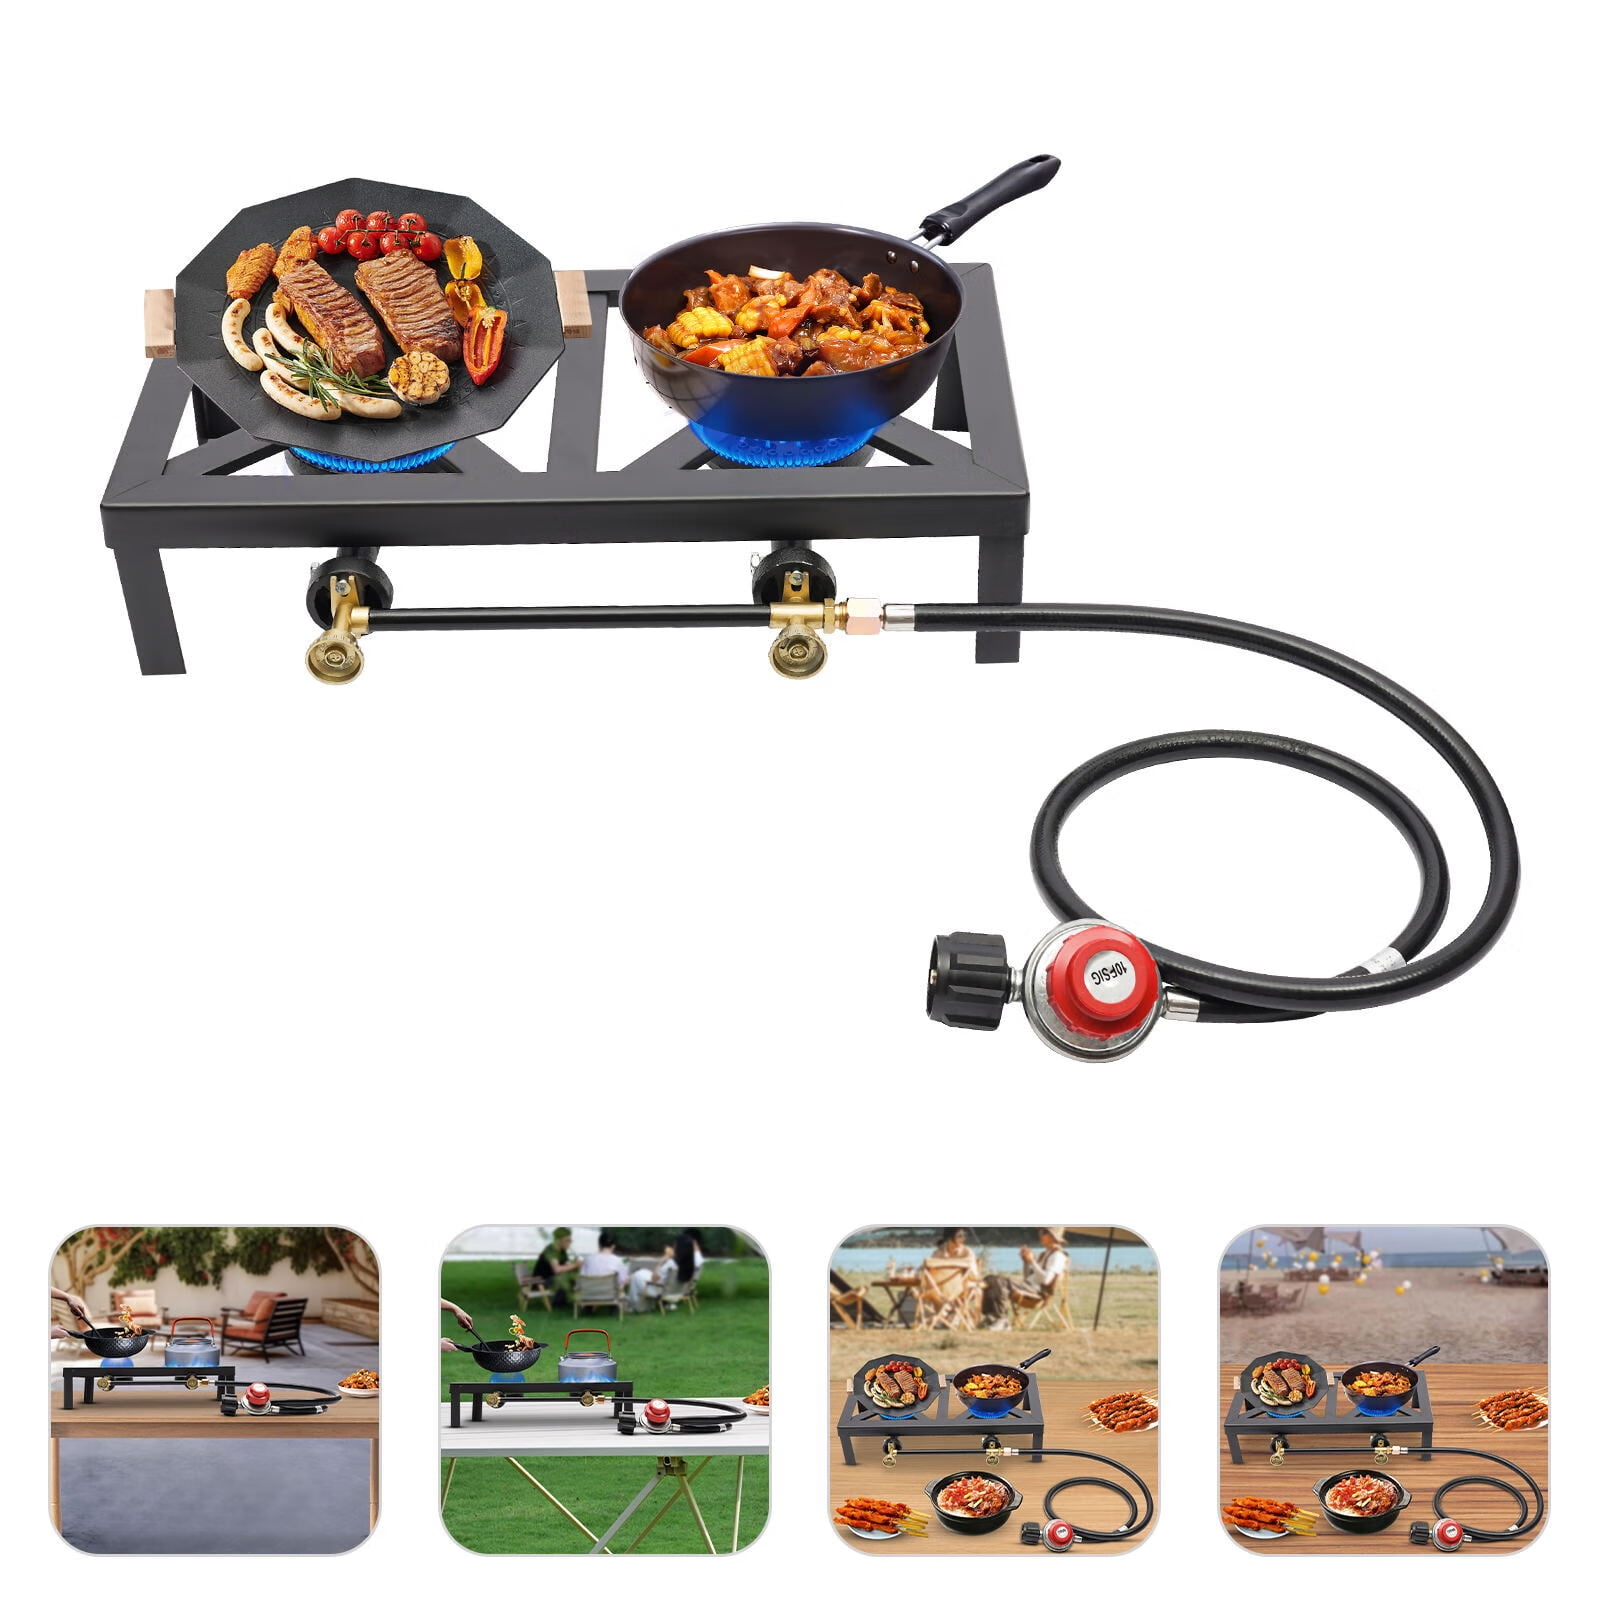 Portable Double Burner Outdoor Gas Stove Hiking Fishing Propane Gas Cooker  With Hose For Patio Camping